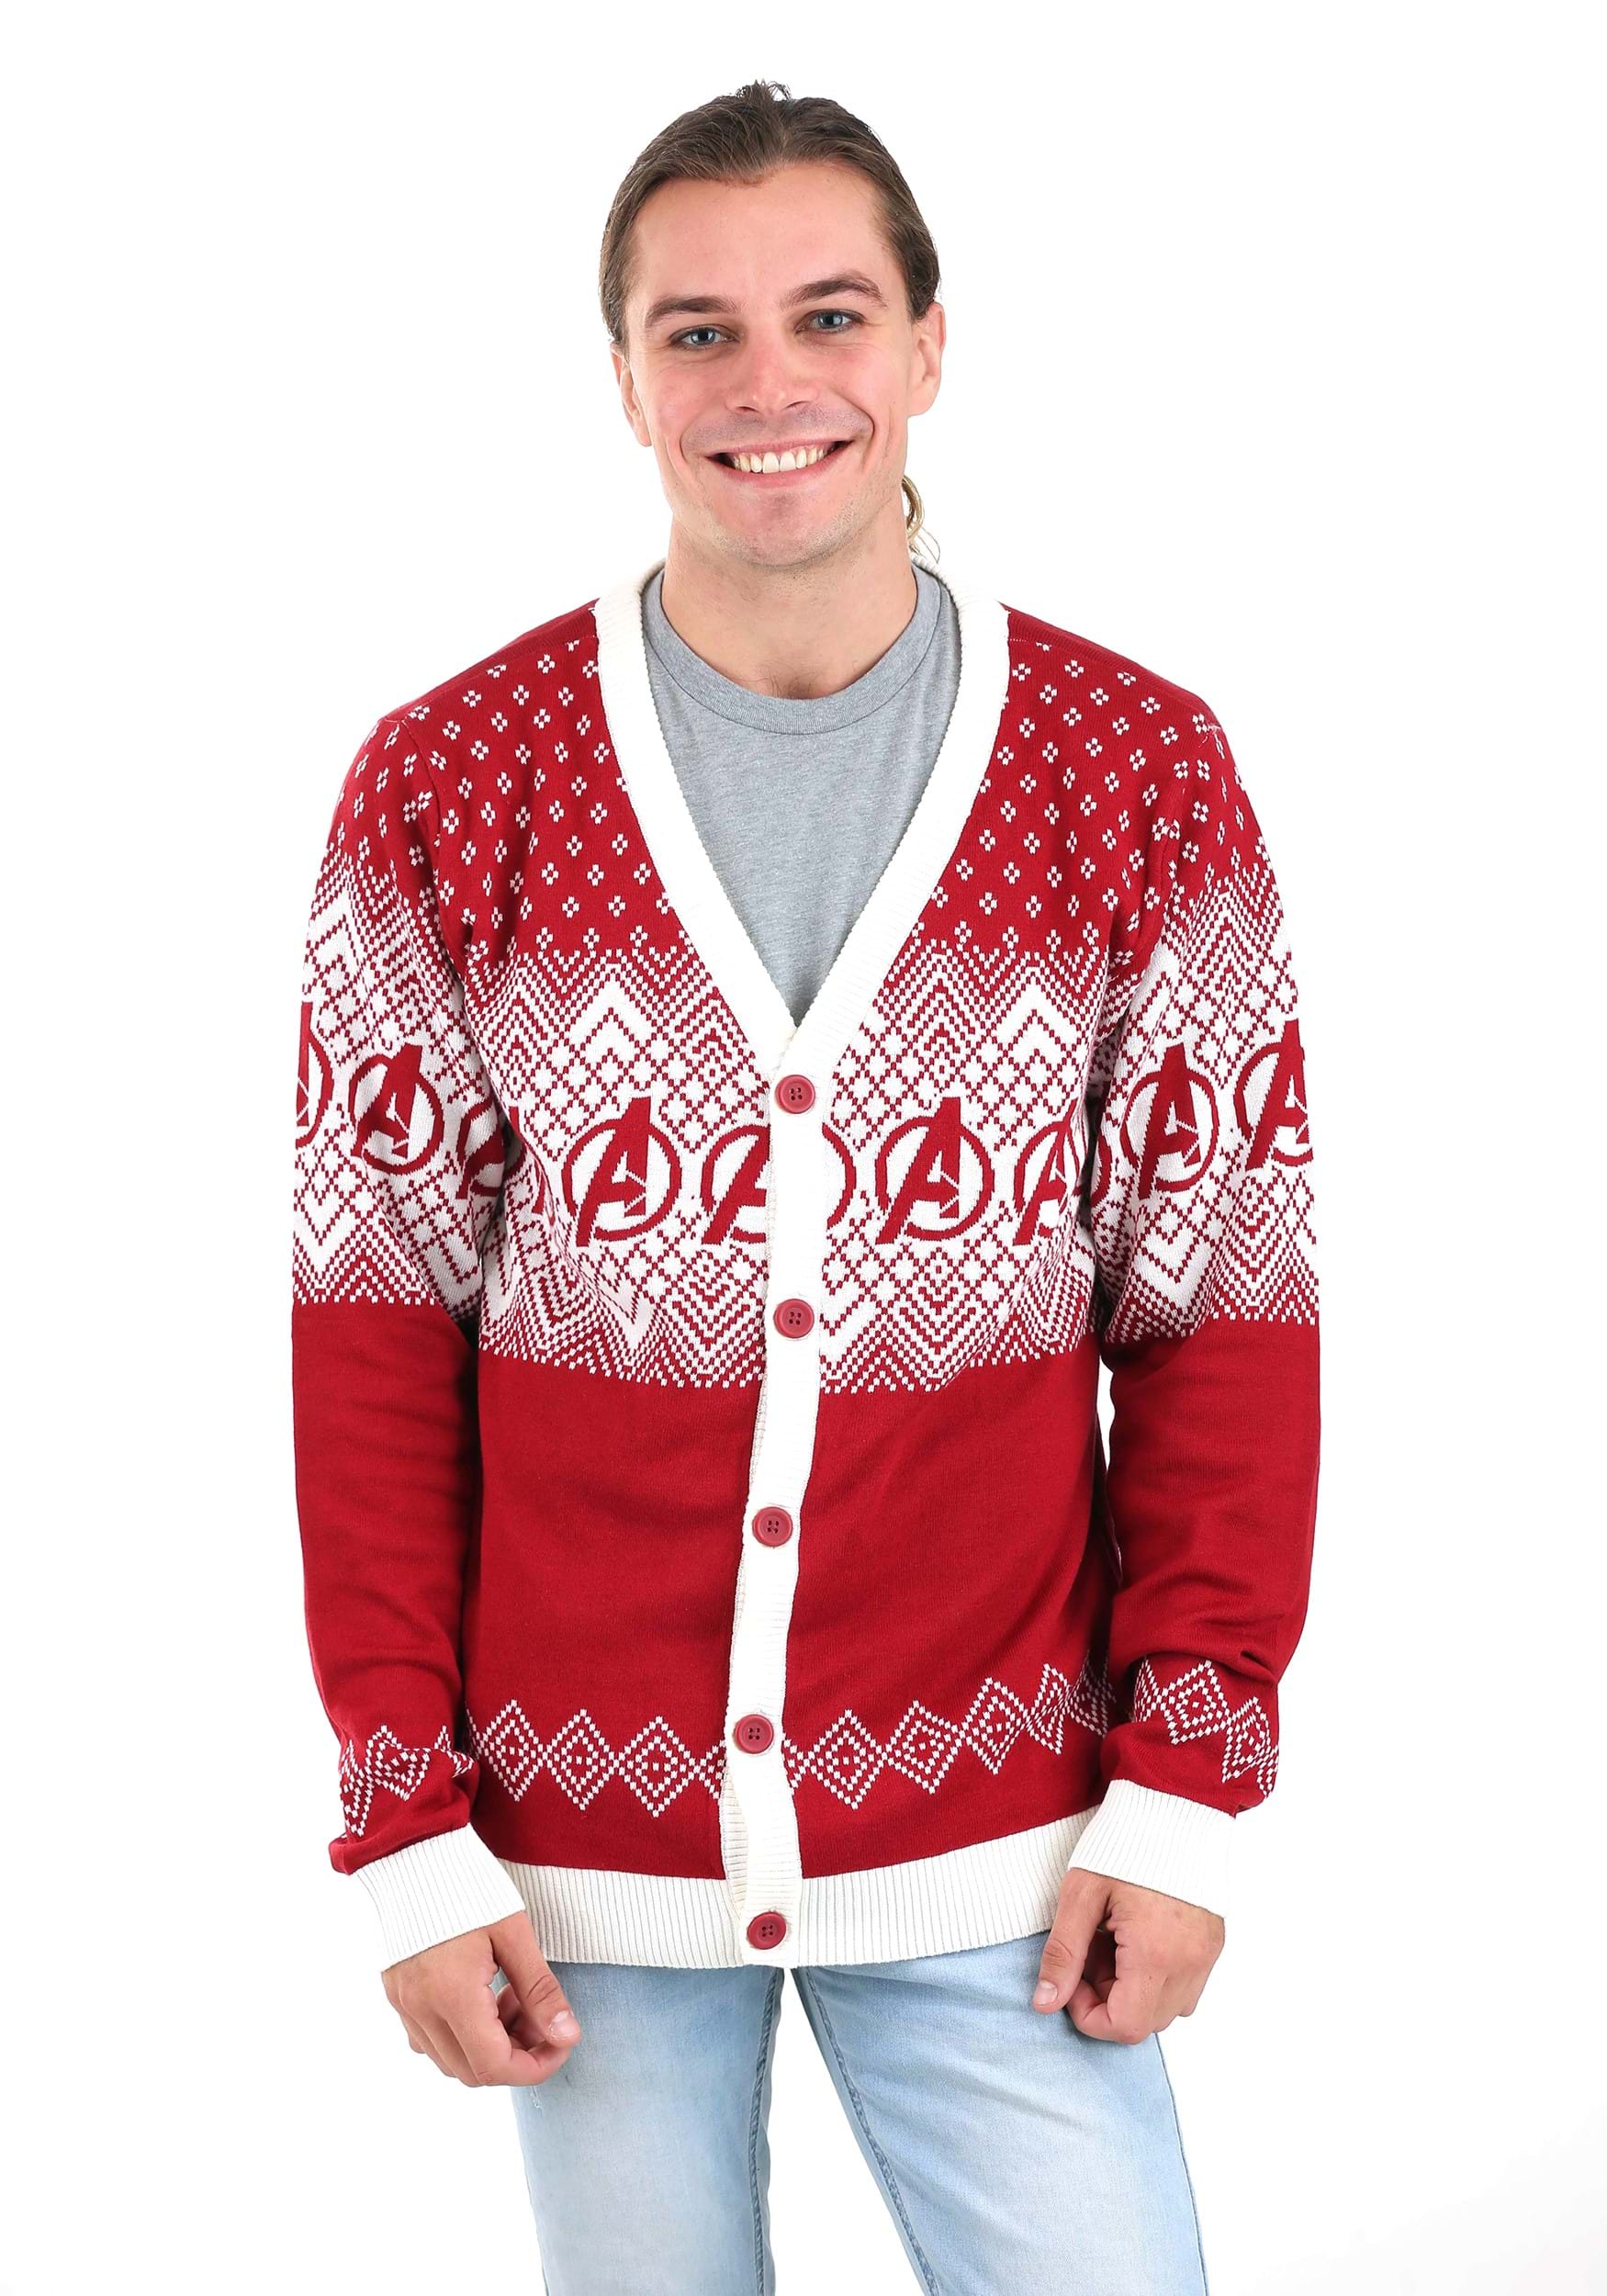 Marvel Avengers Ugly Christmas Cardigan Sweater For Adults